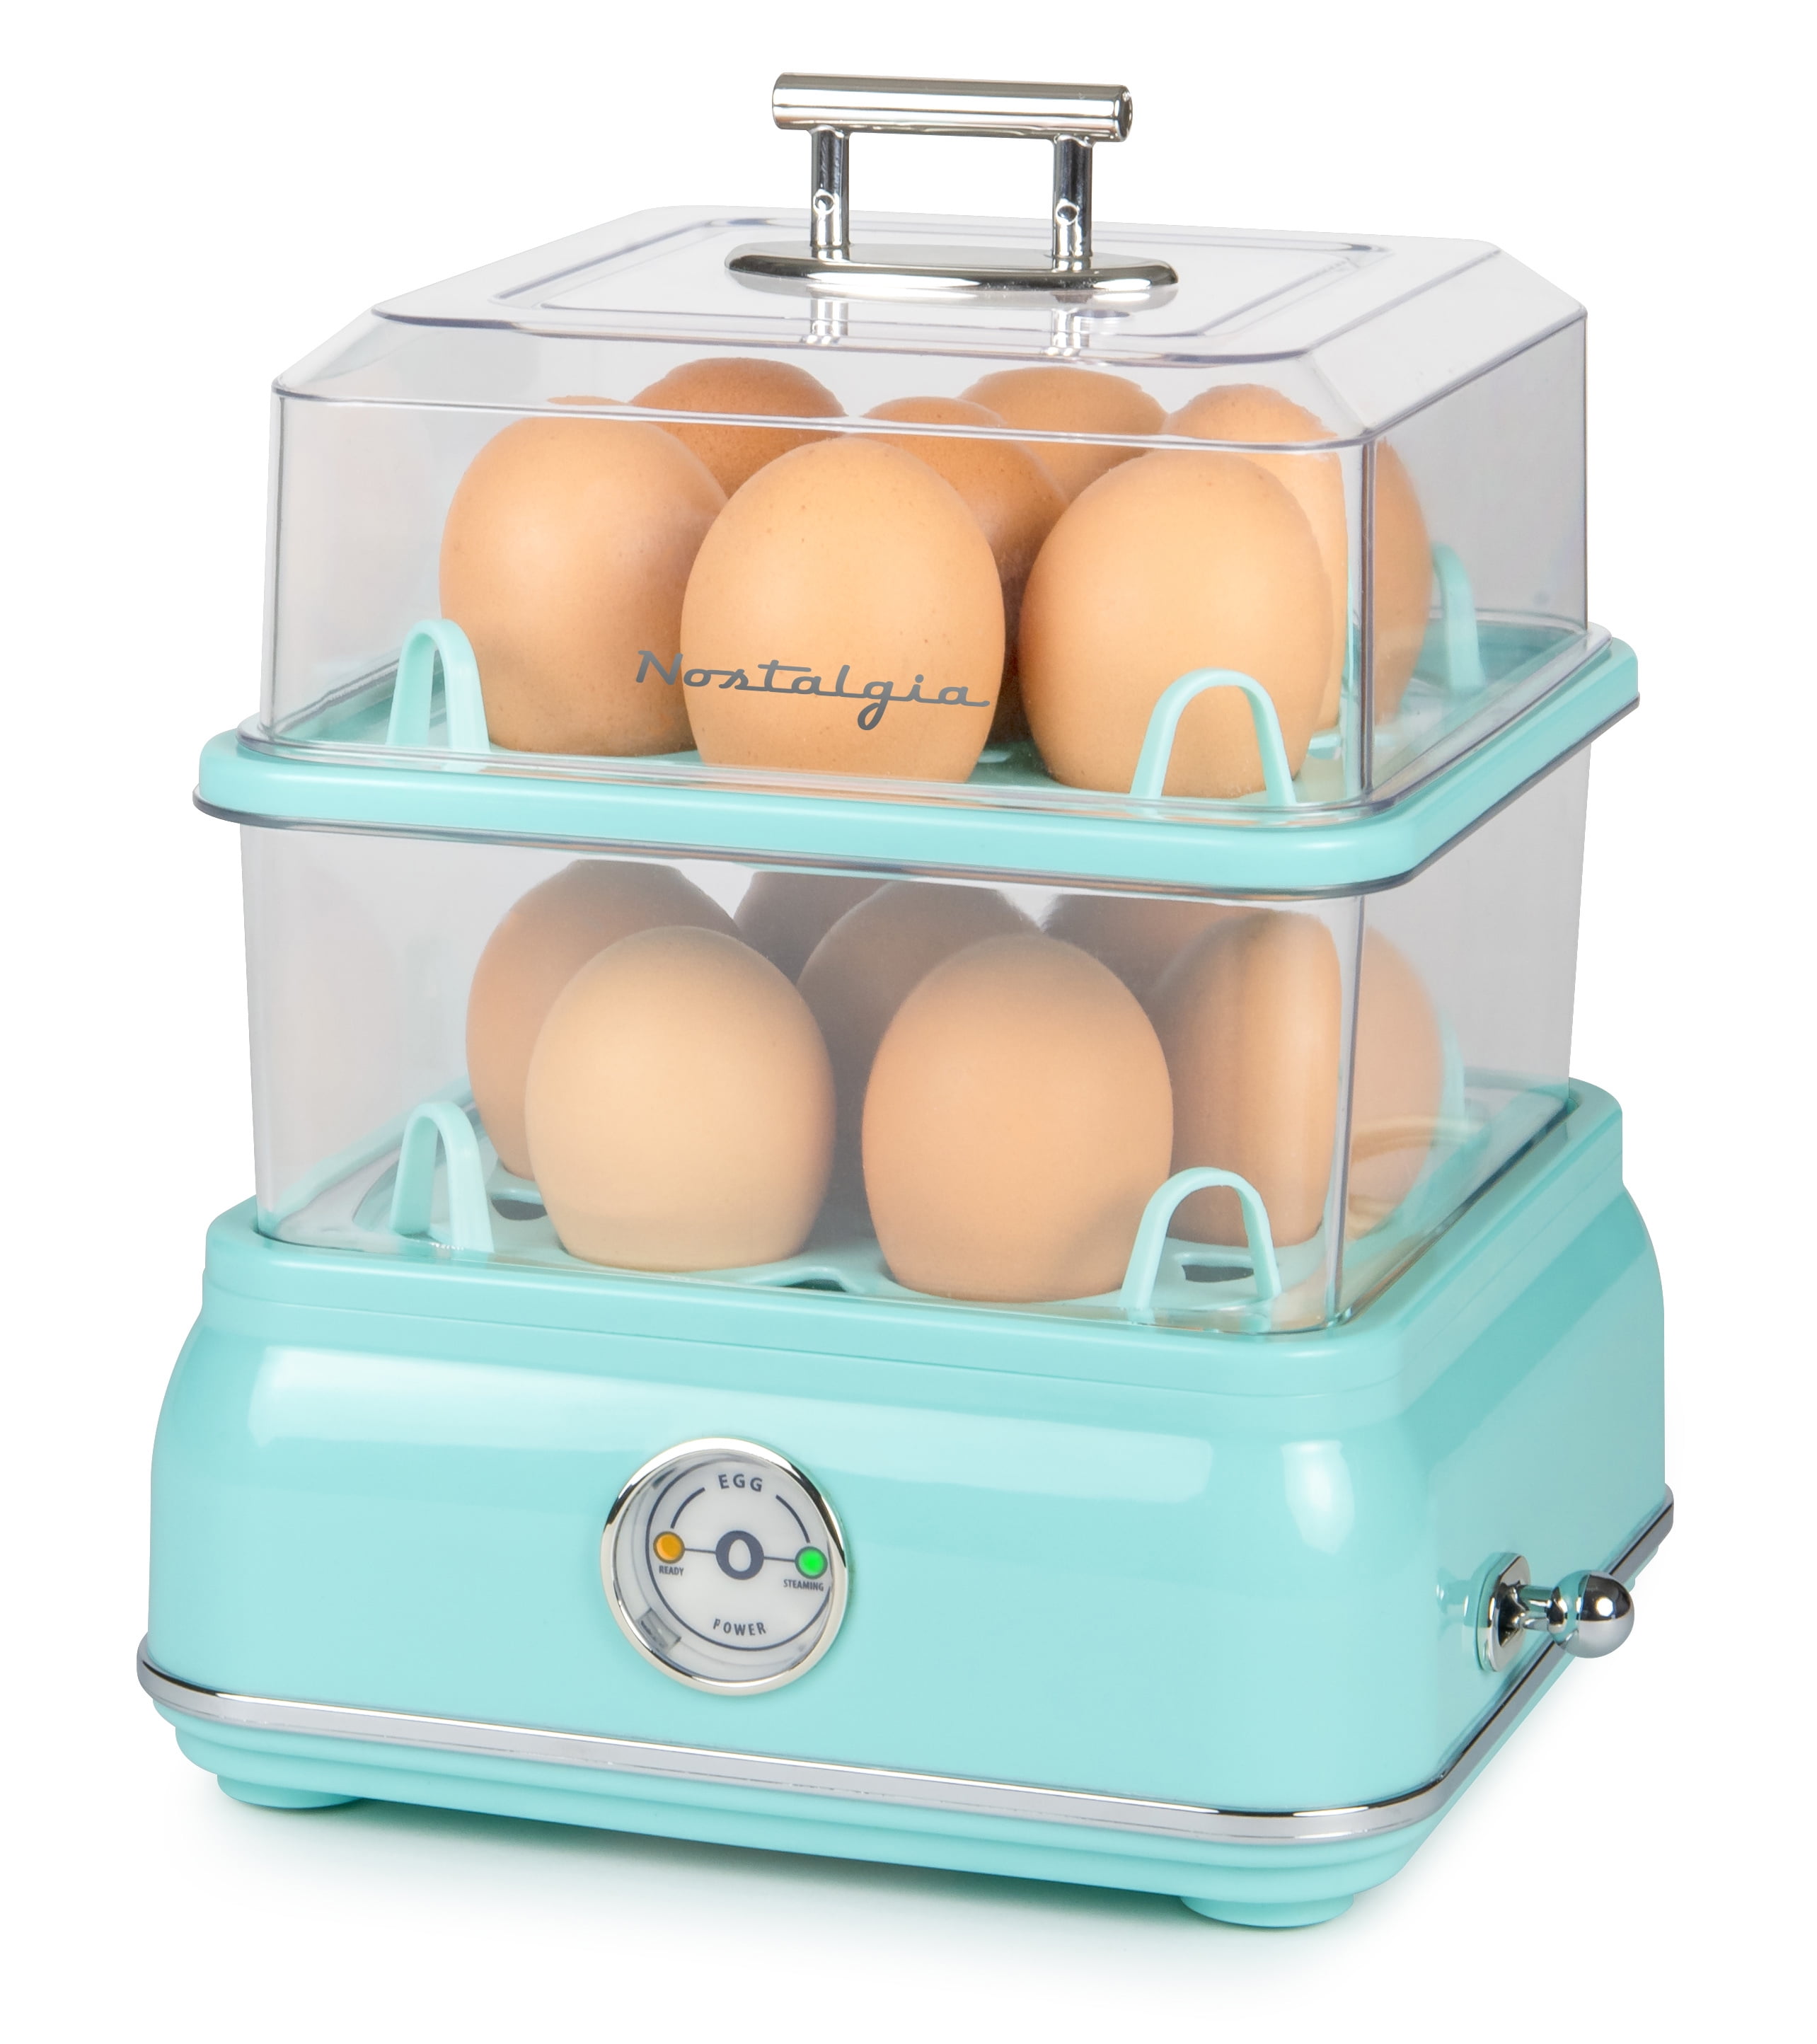 Deluxe Egg Cooker, Easy & Delicious Eggs Every Time